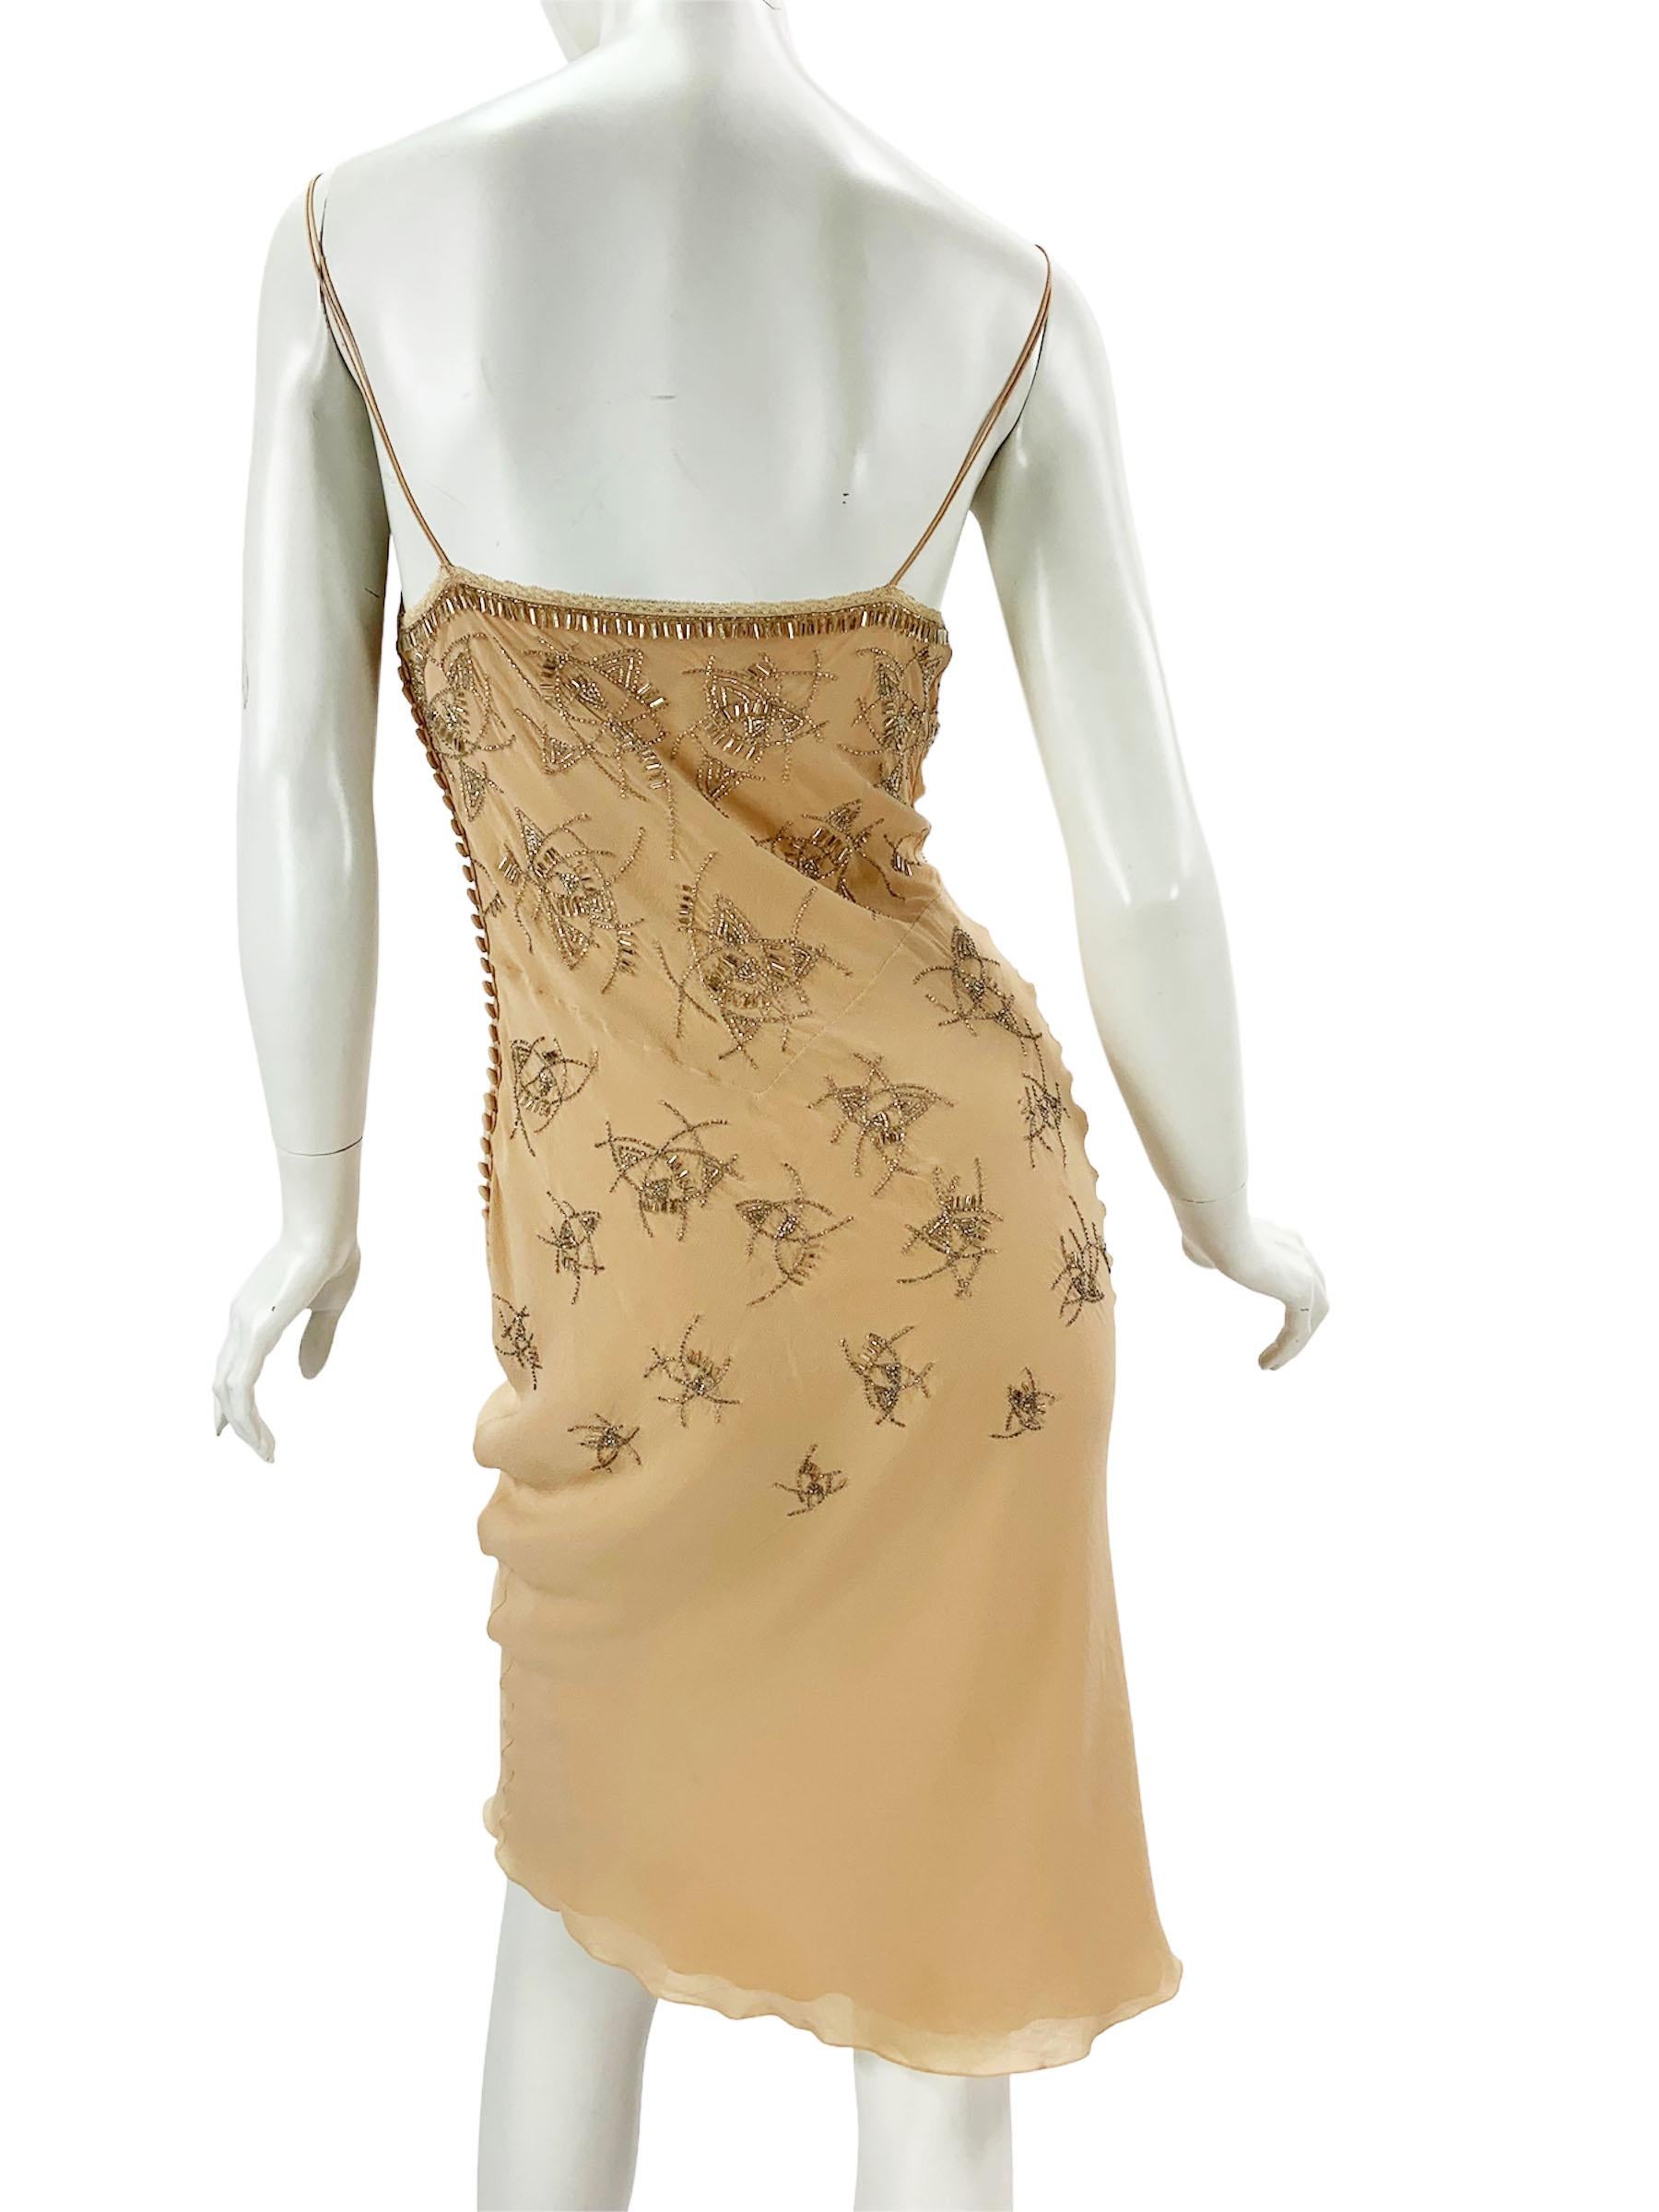 Women's Christian Dior by John Galliano 2005 Silk Nude Embellished Dress Fr. 36 and 42